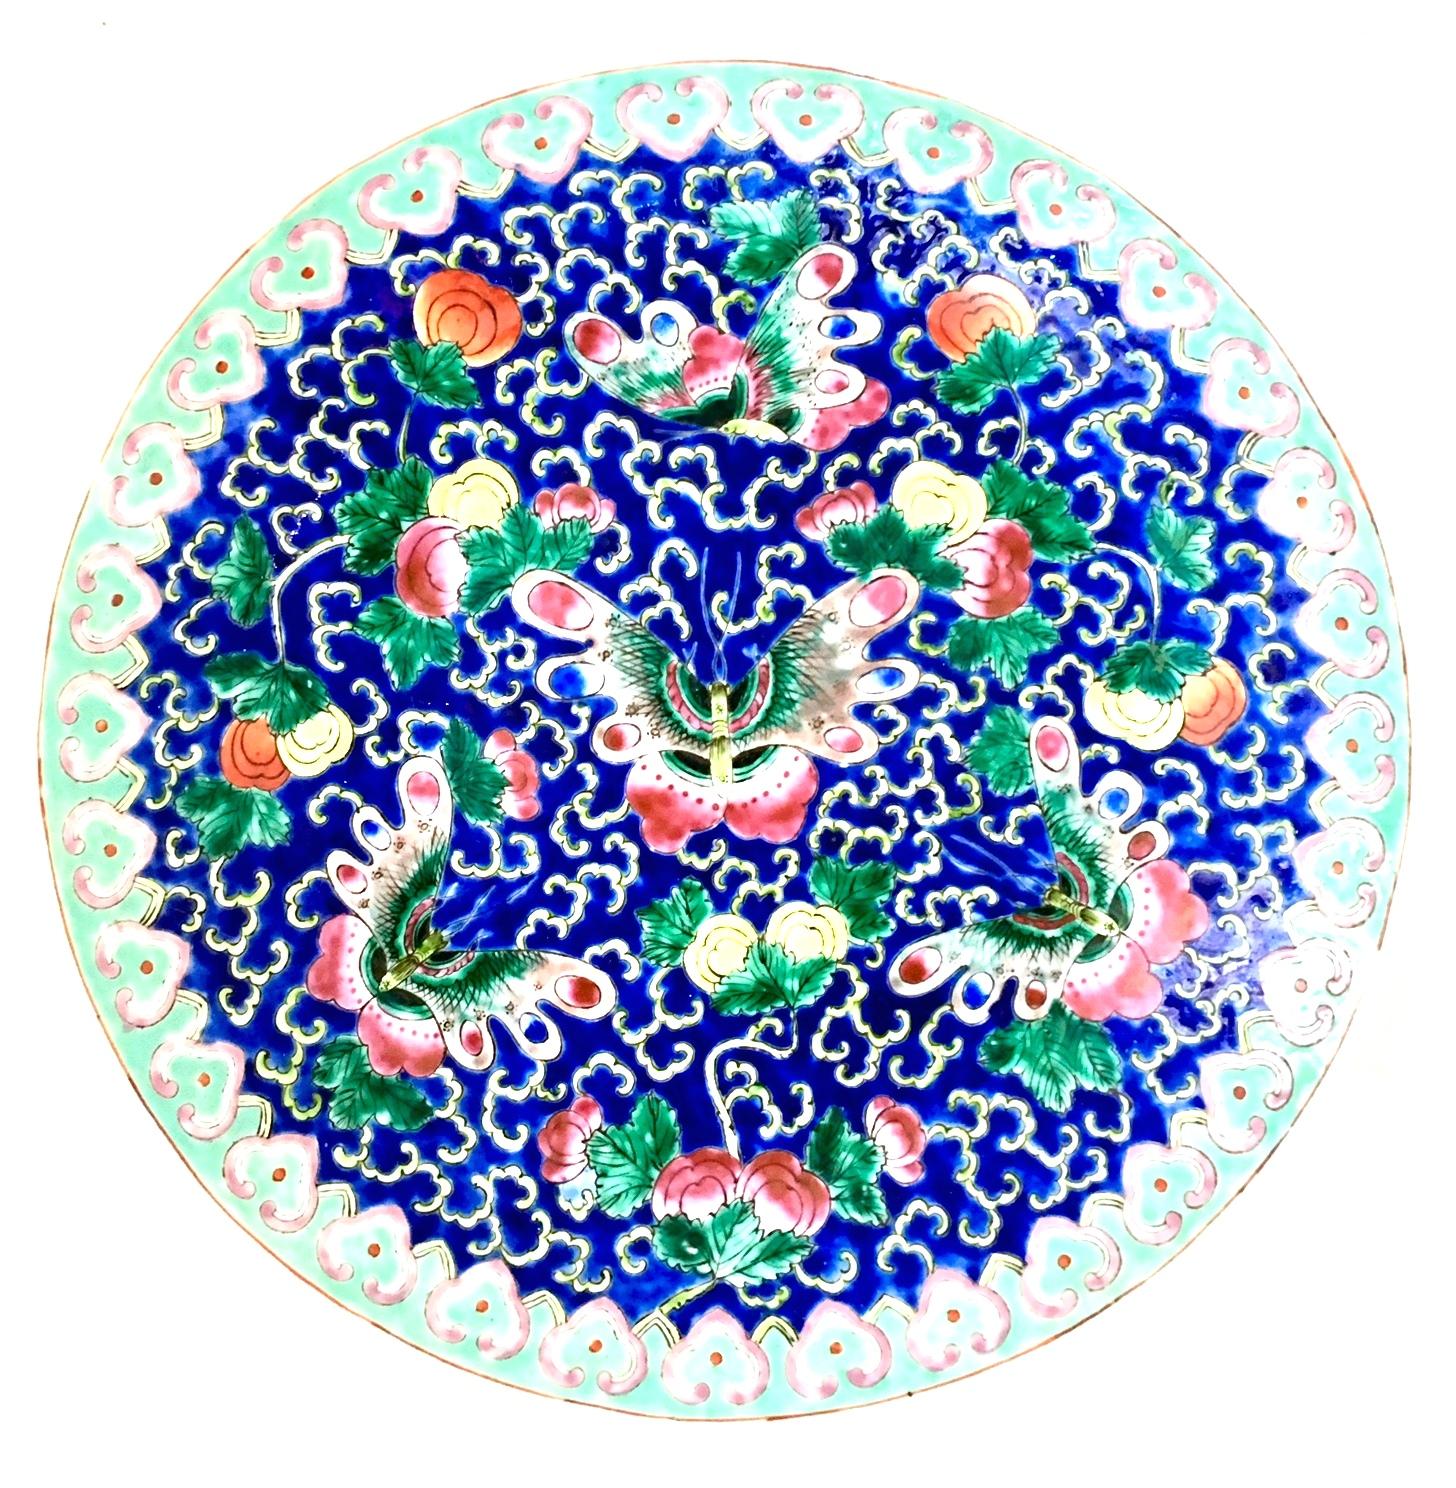 Mid-20th Century Chinese Export Porcelain Famille Large Butterfly Motif Center Bowl. This one of a kind artisan, hand-painted enamel and 22-K gold center bowl features a vibrant and vivid blue ground with turquoise and pink geometric border with a 